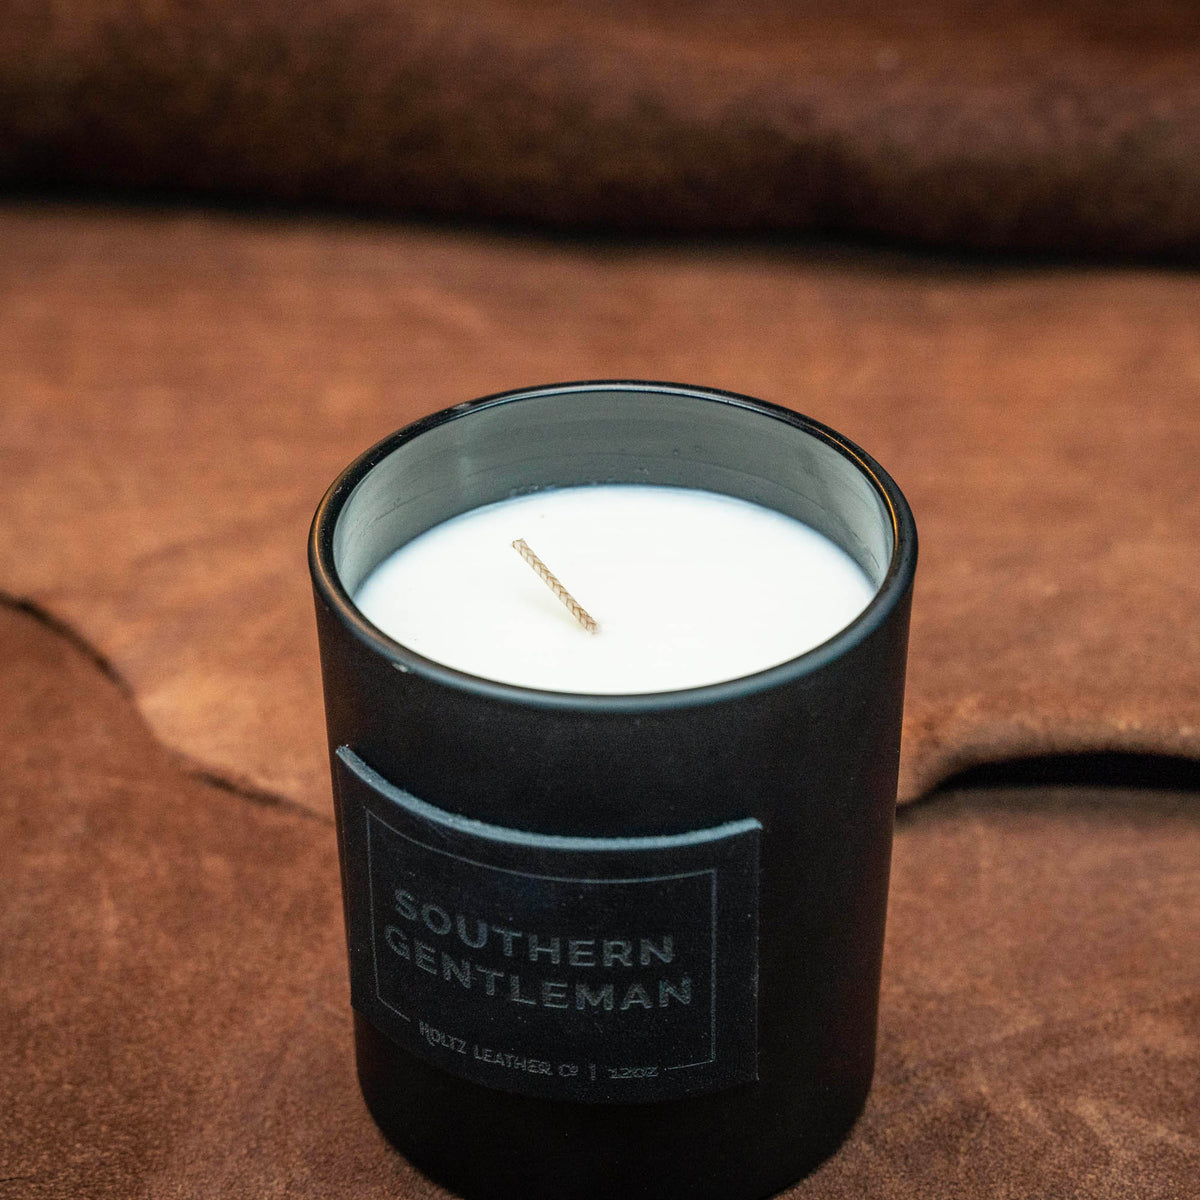 Southern Gentleman - Smolder Luxe Masculine Scented Leather Patch Candle